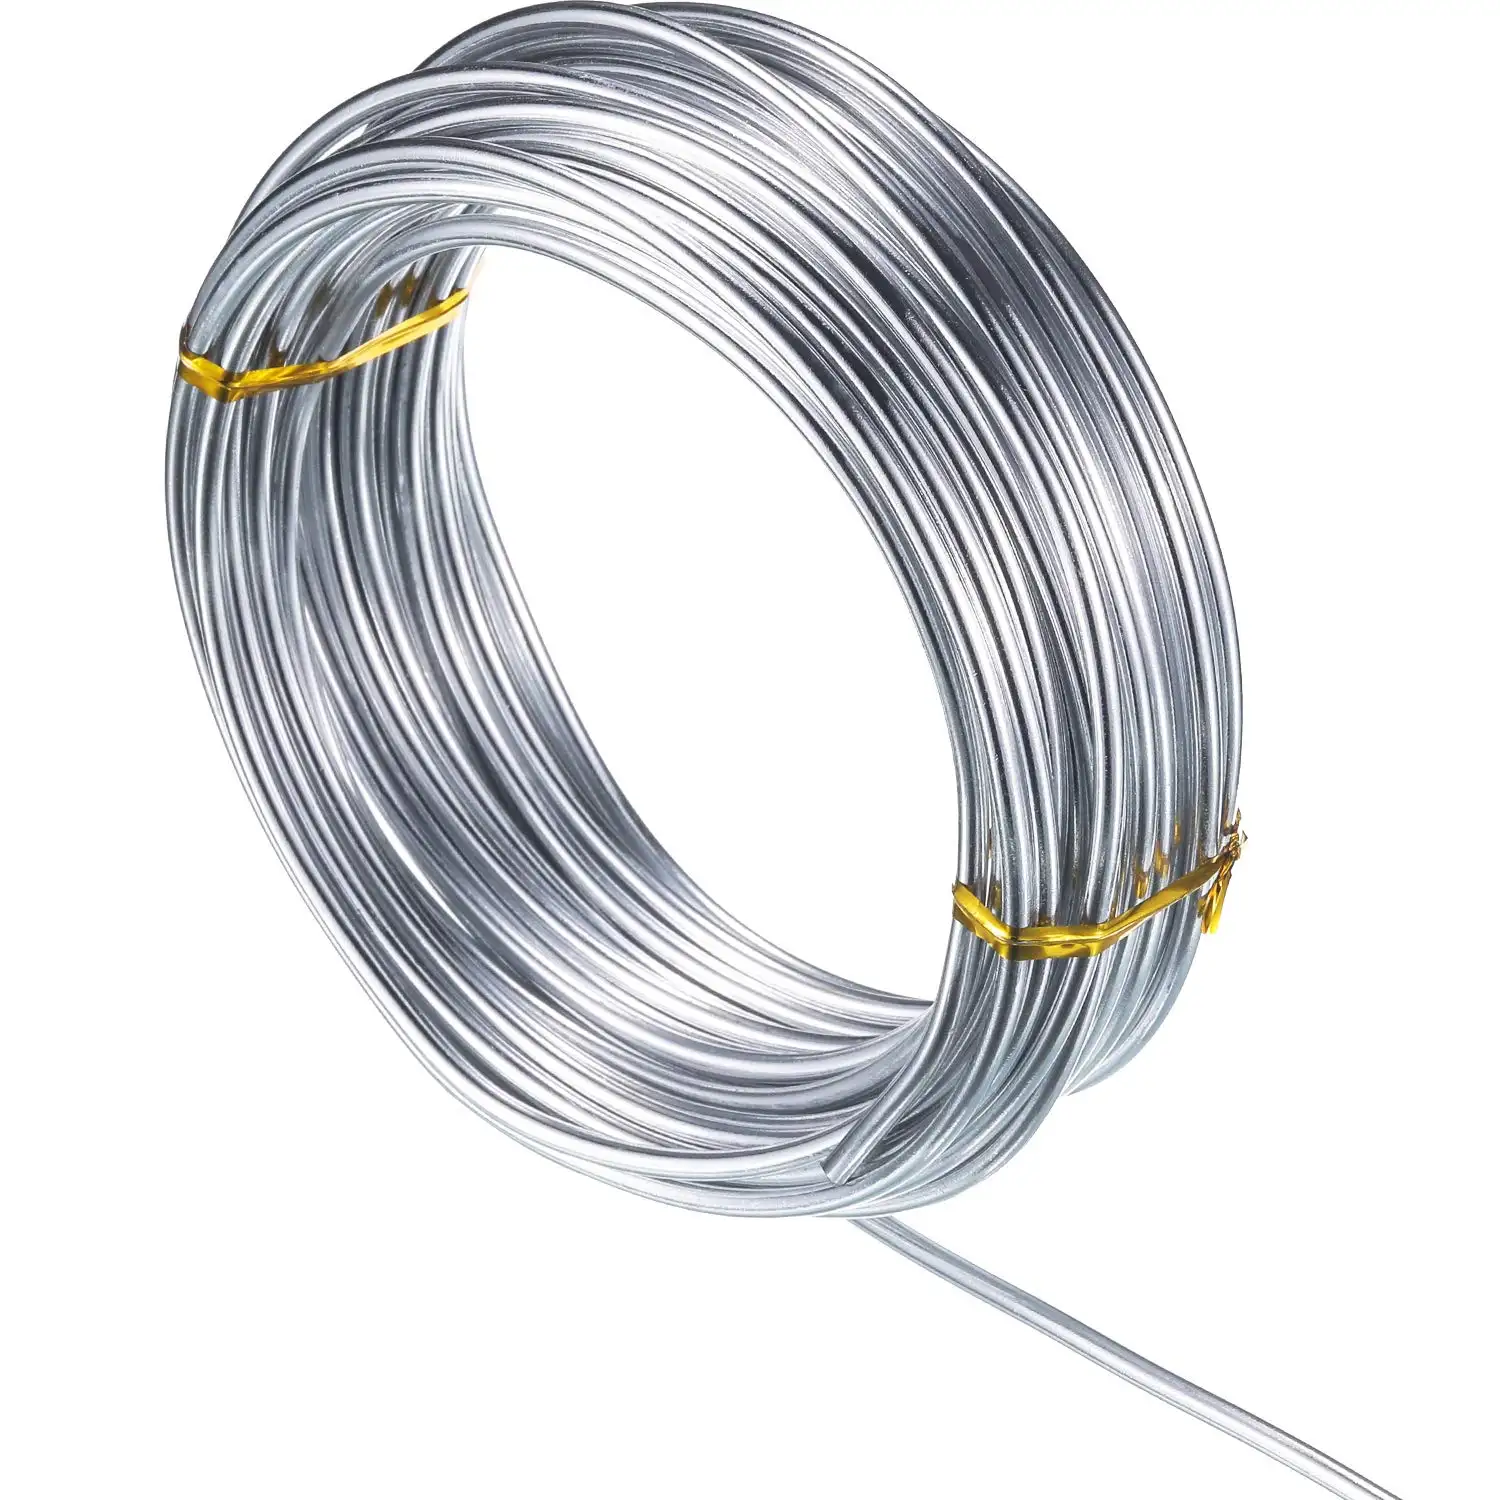 High Quality oxidized Colorful Bendable Aluminum Wire for DIY Crafts Jewelry Making